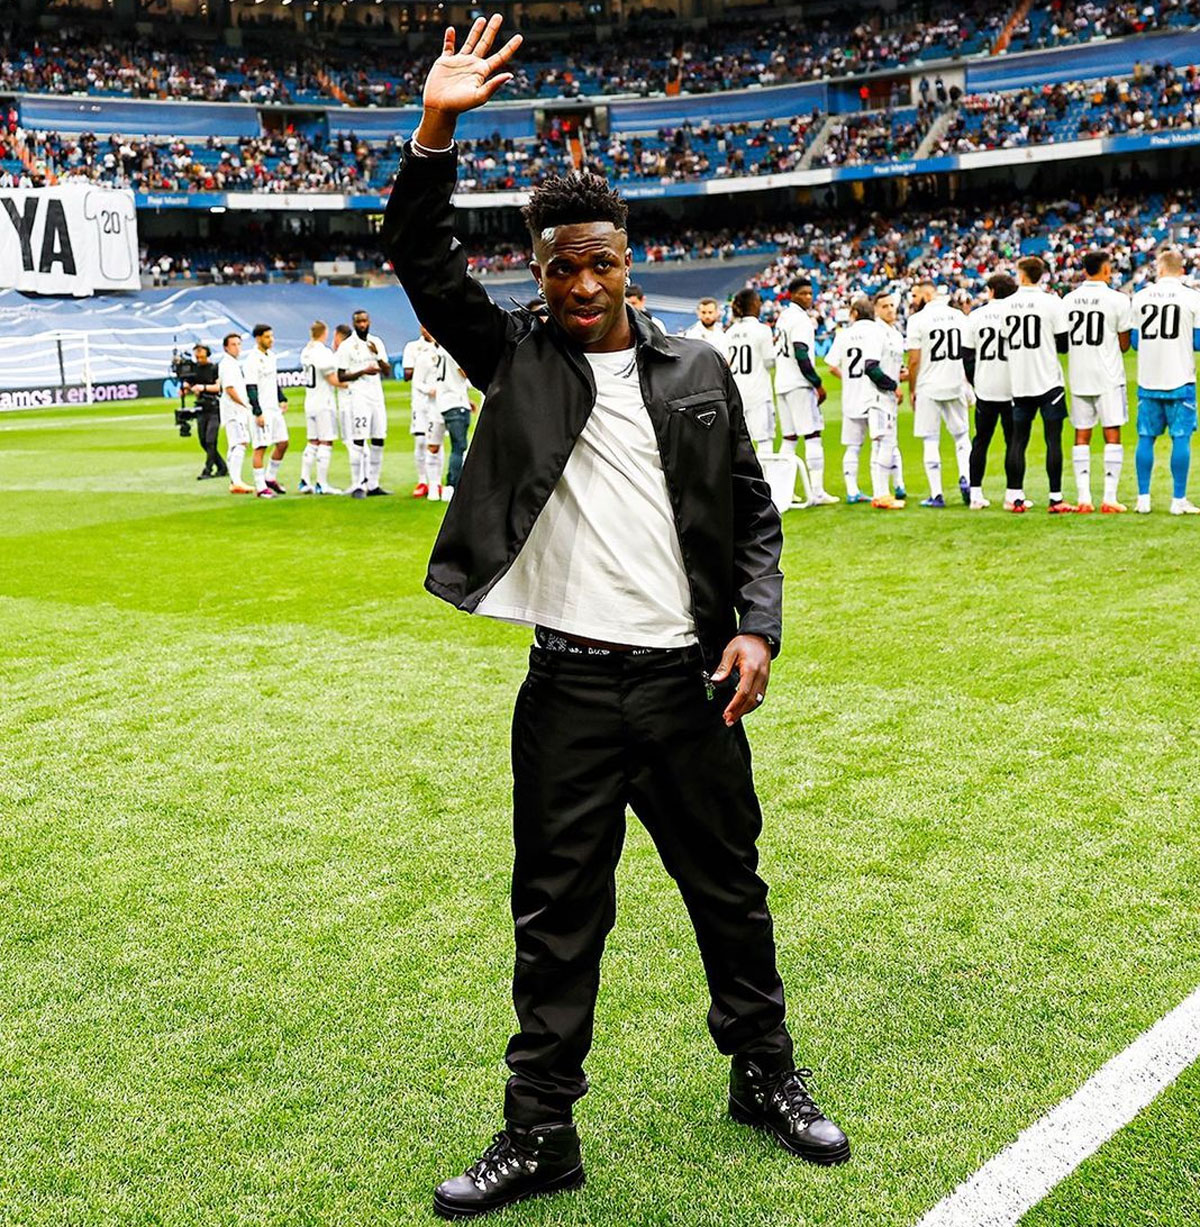 PIX: Real Madrid players, fans rally behind Vinicius Jr - Rediff.com